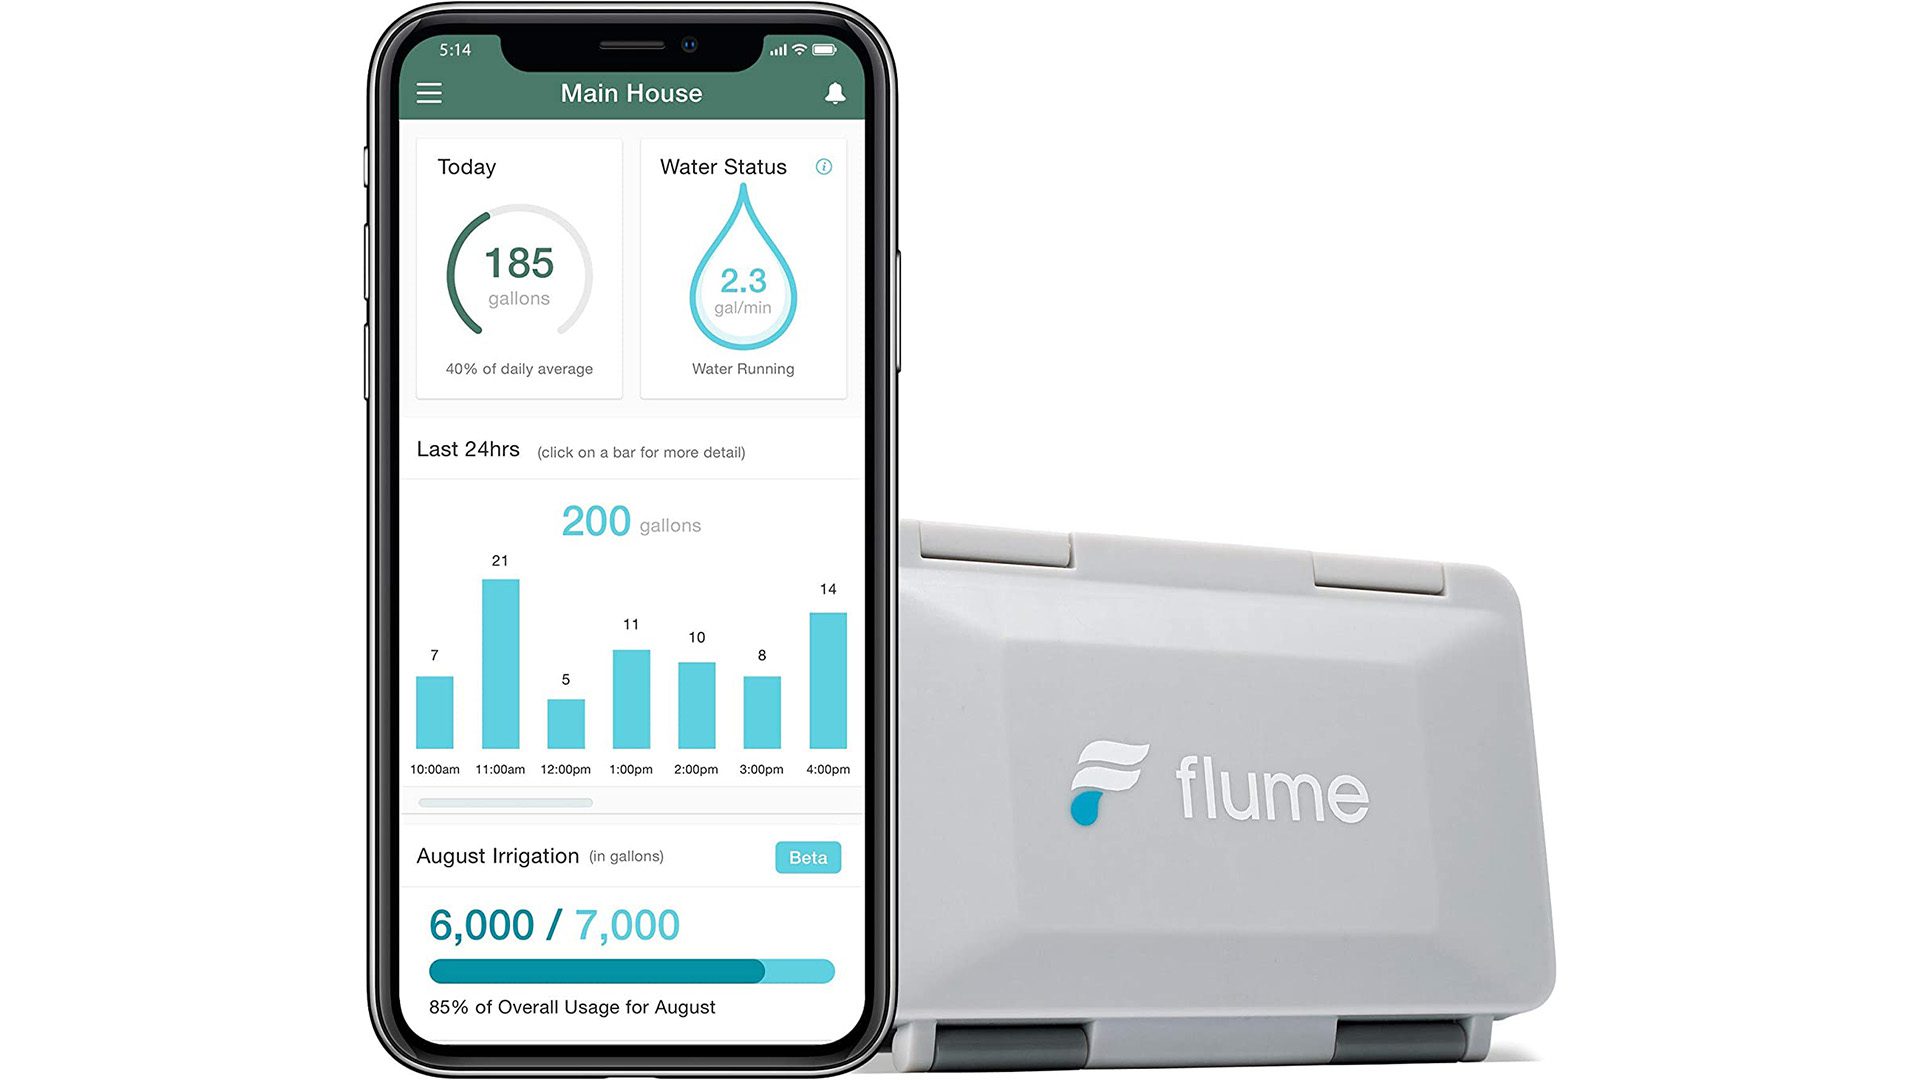 Smart Home Water Monitor products to save water